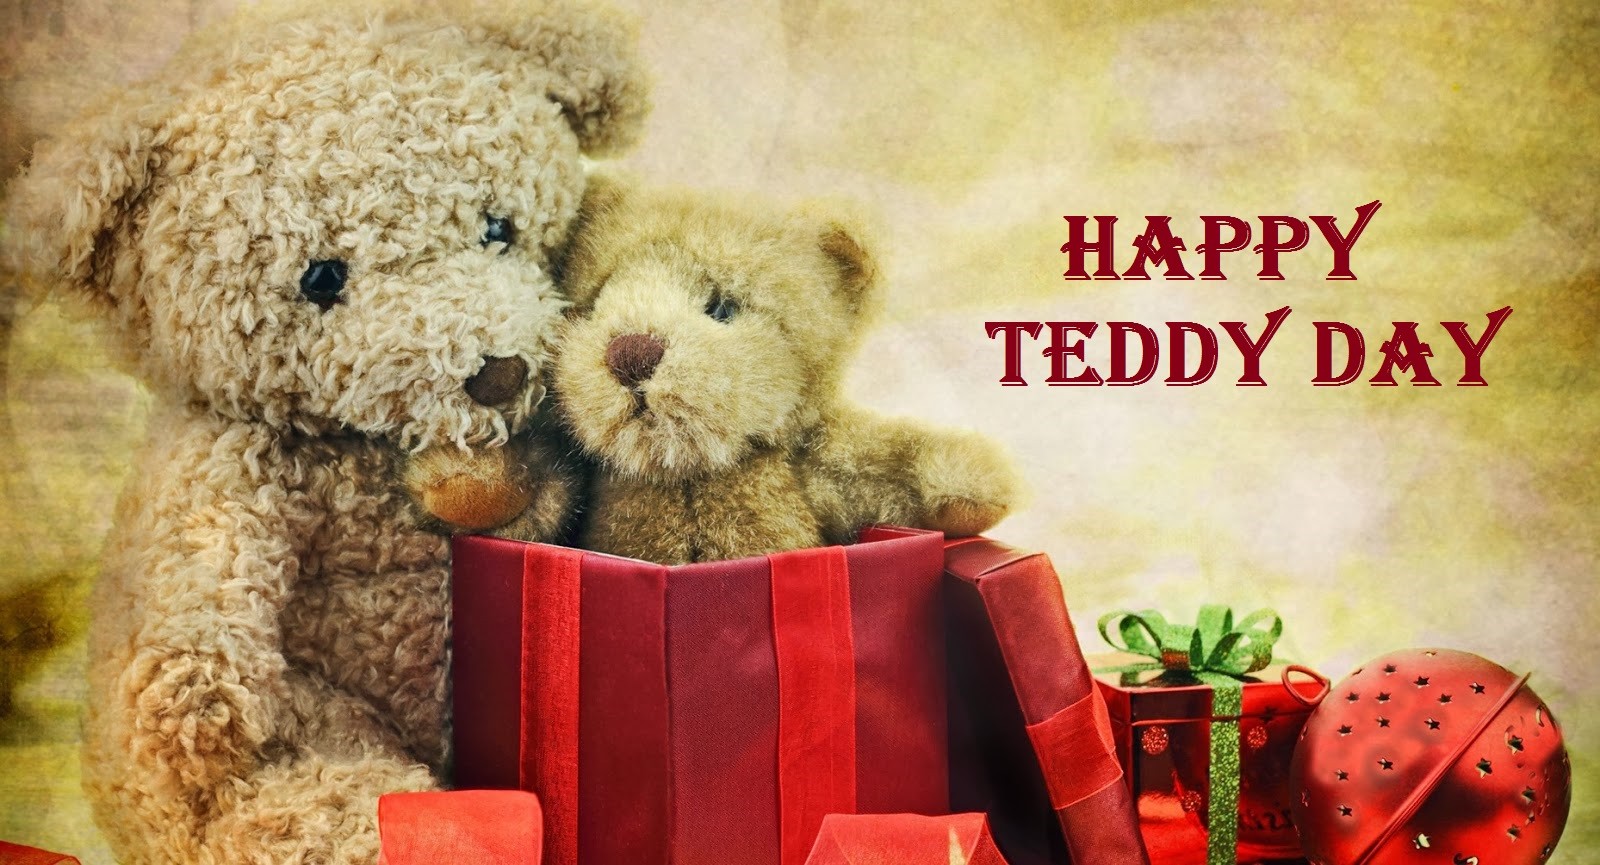 teddy bear day images